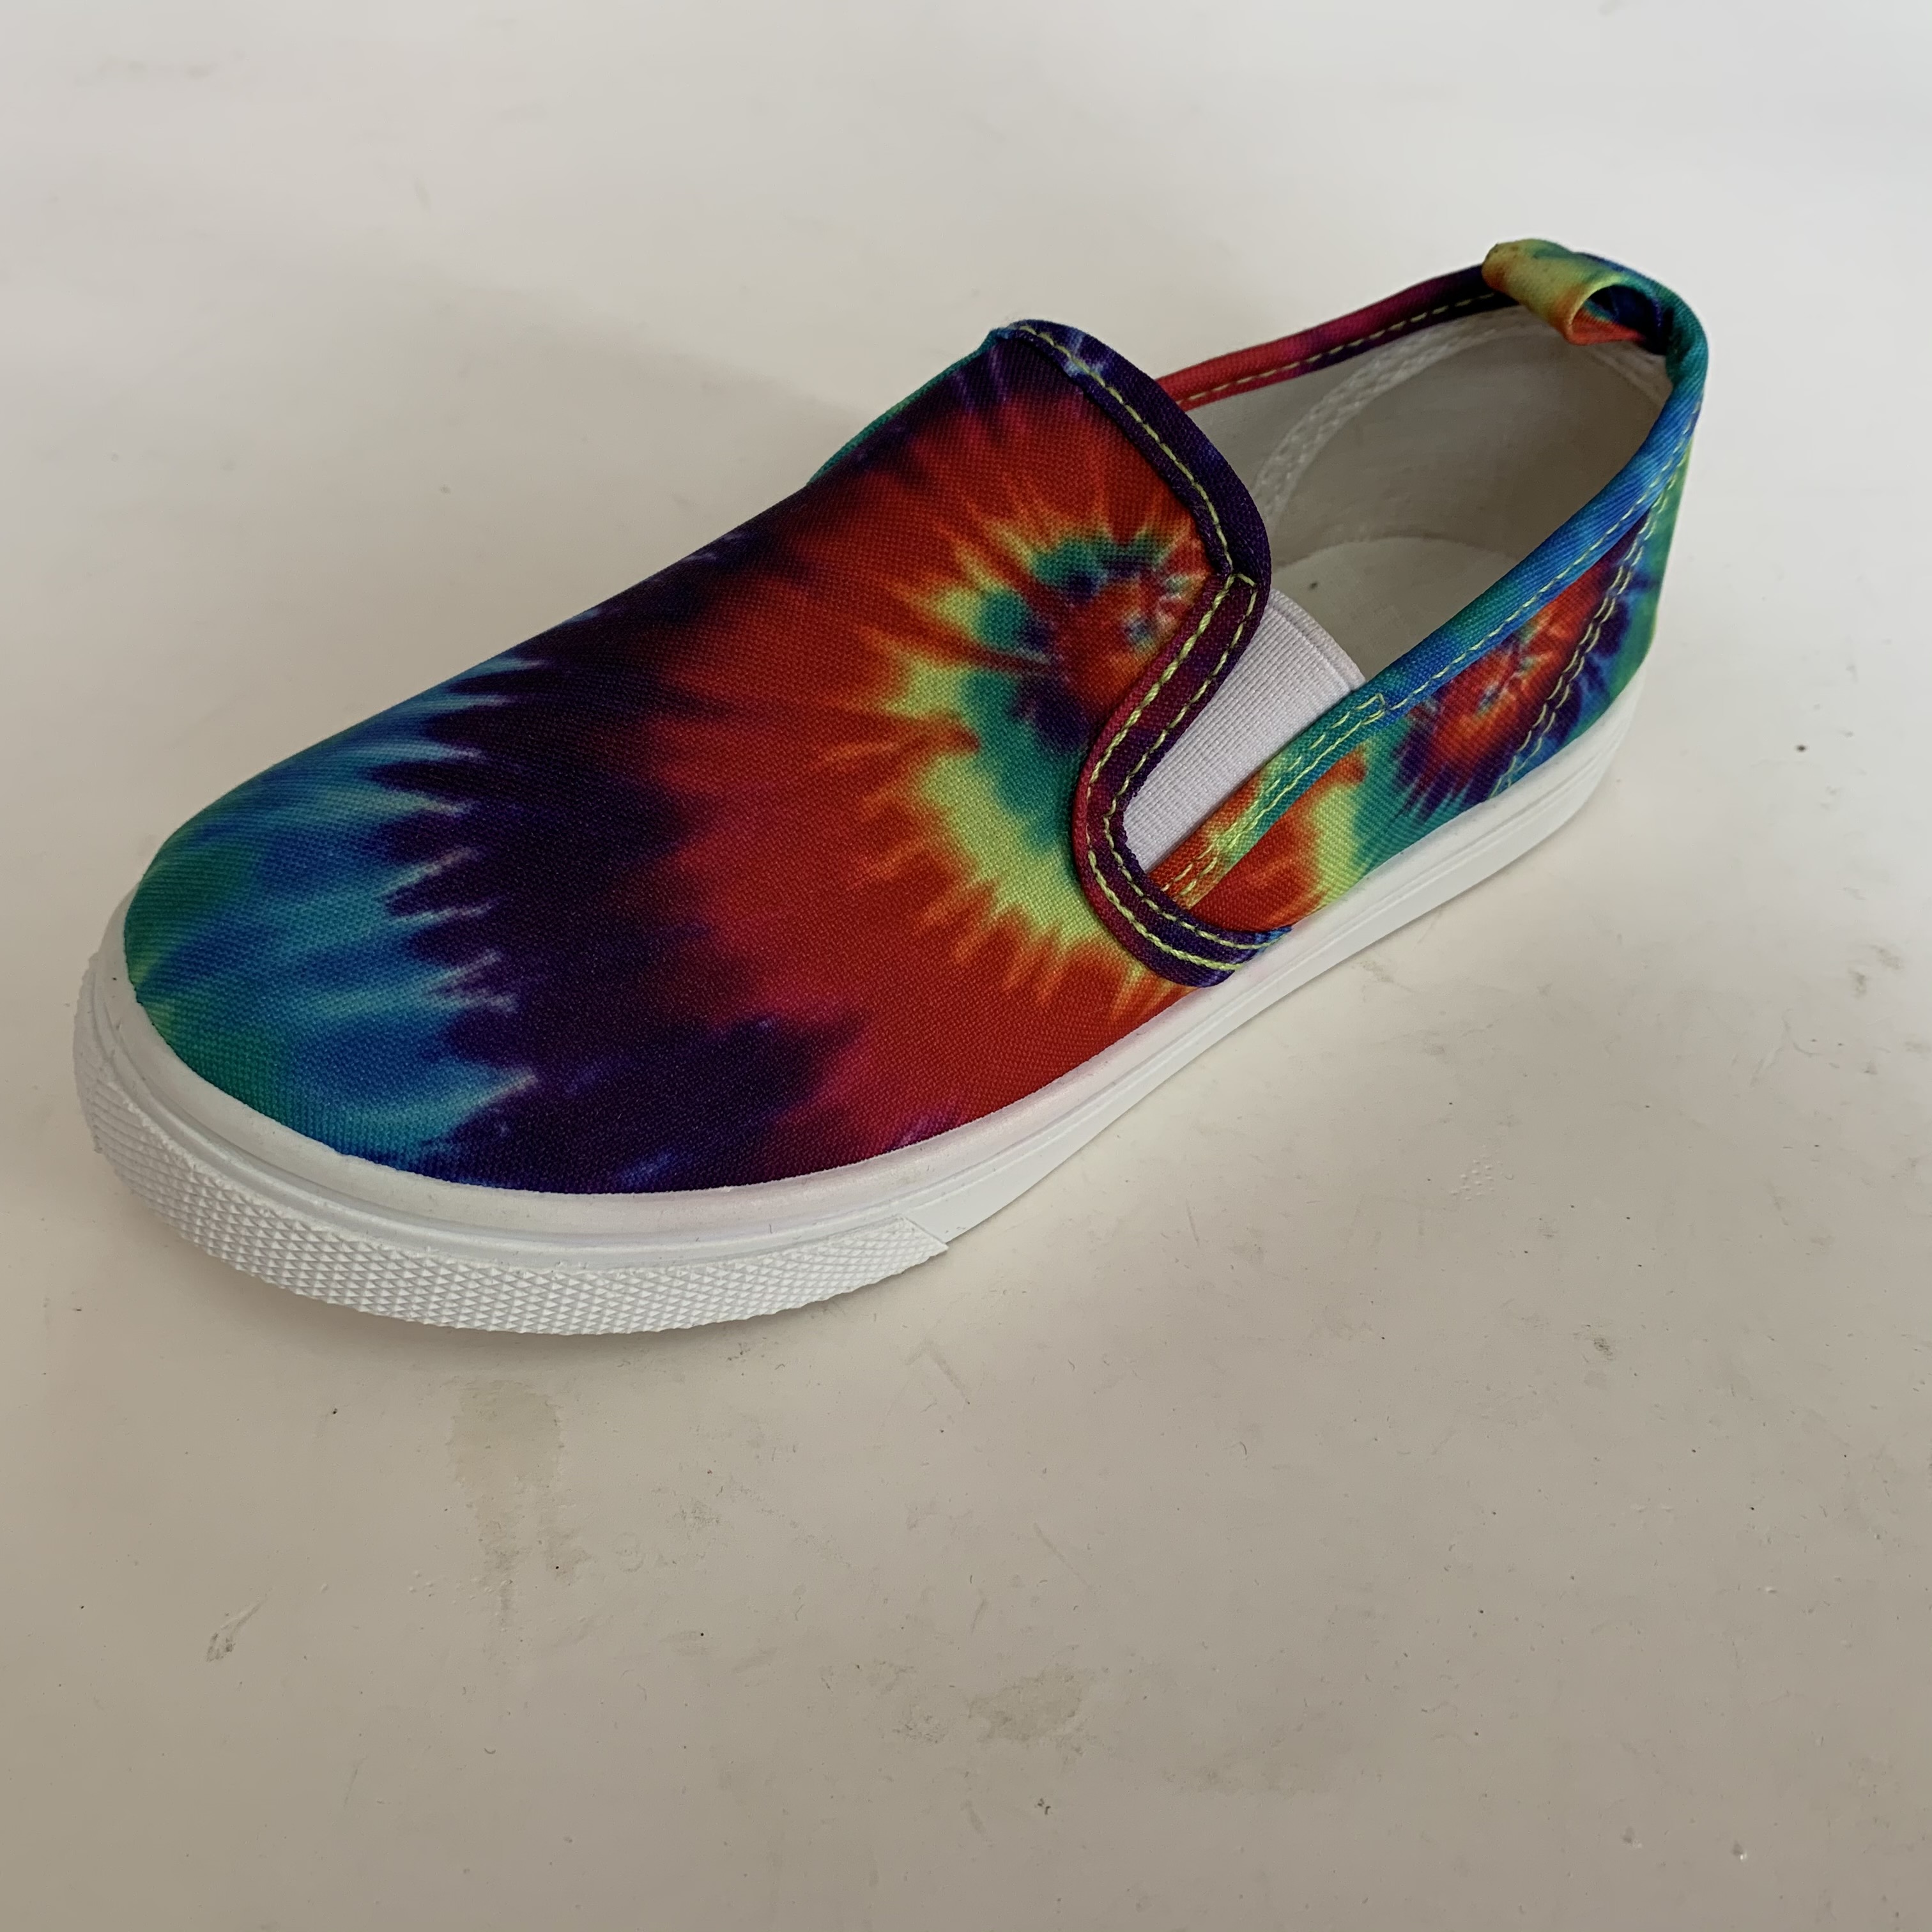 Unisex Kids and Toddlers' Casual Slip-on Printed Canvas Shoe Sneaker 